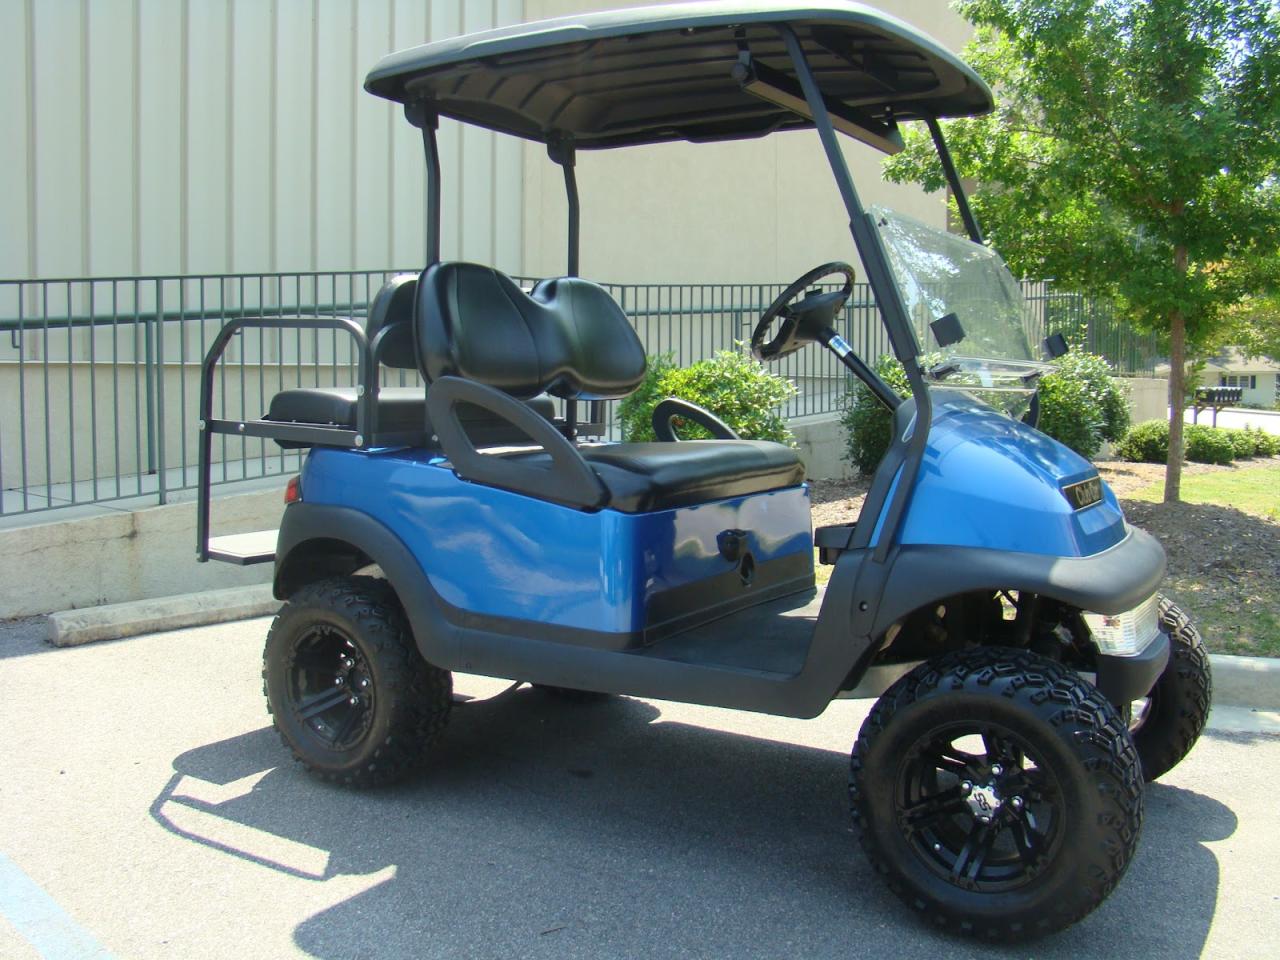 Find Your Dream Golf Cart: Used Golf Carts for Sale by Owner in Kittitas, Washington